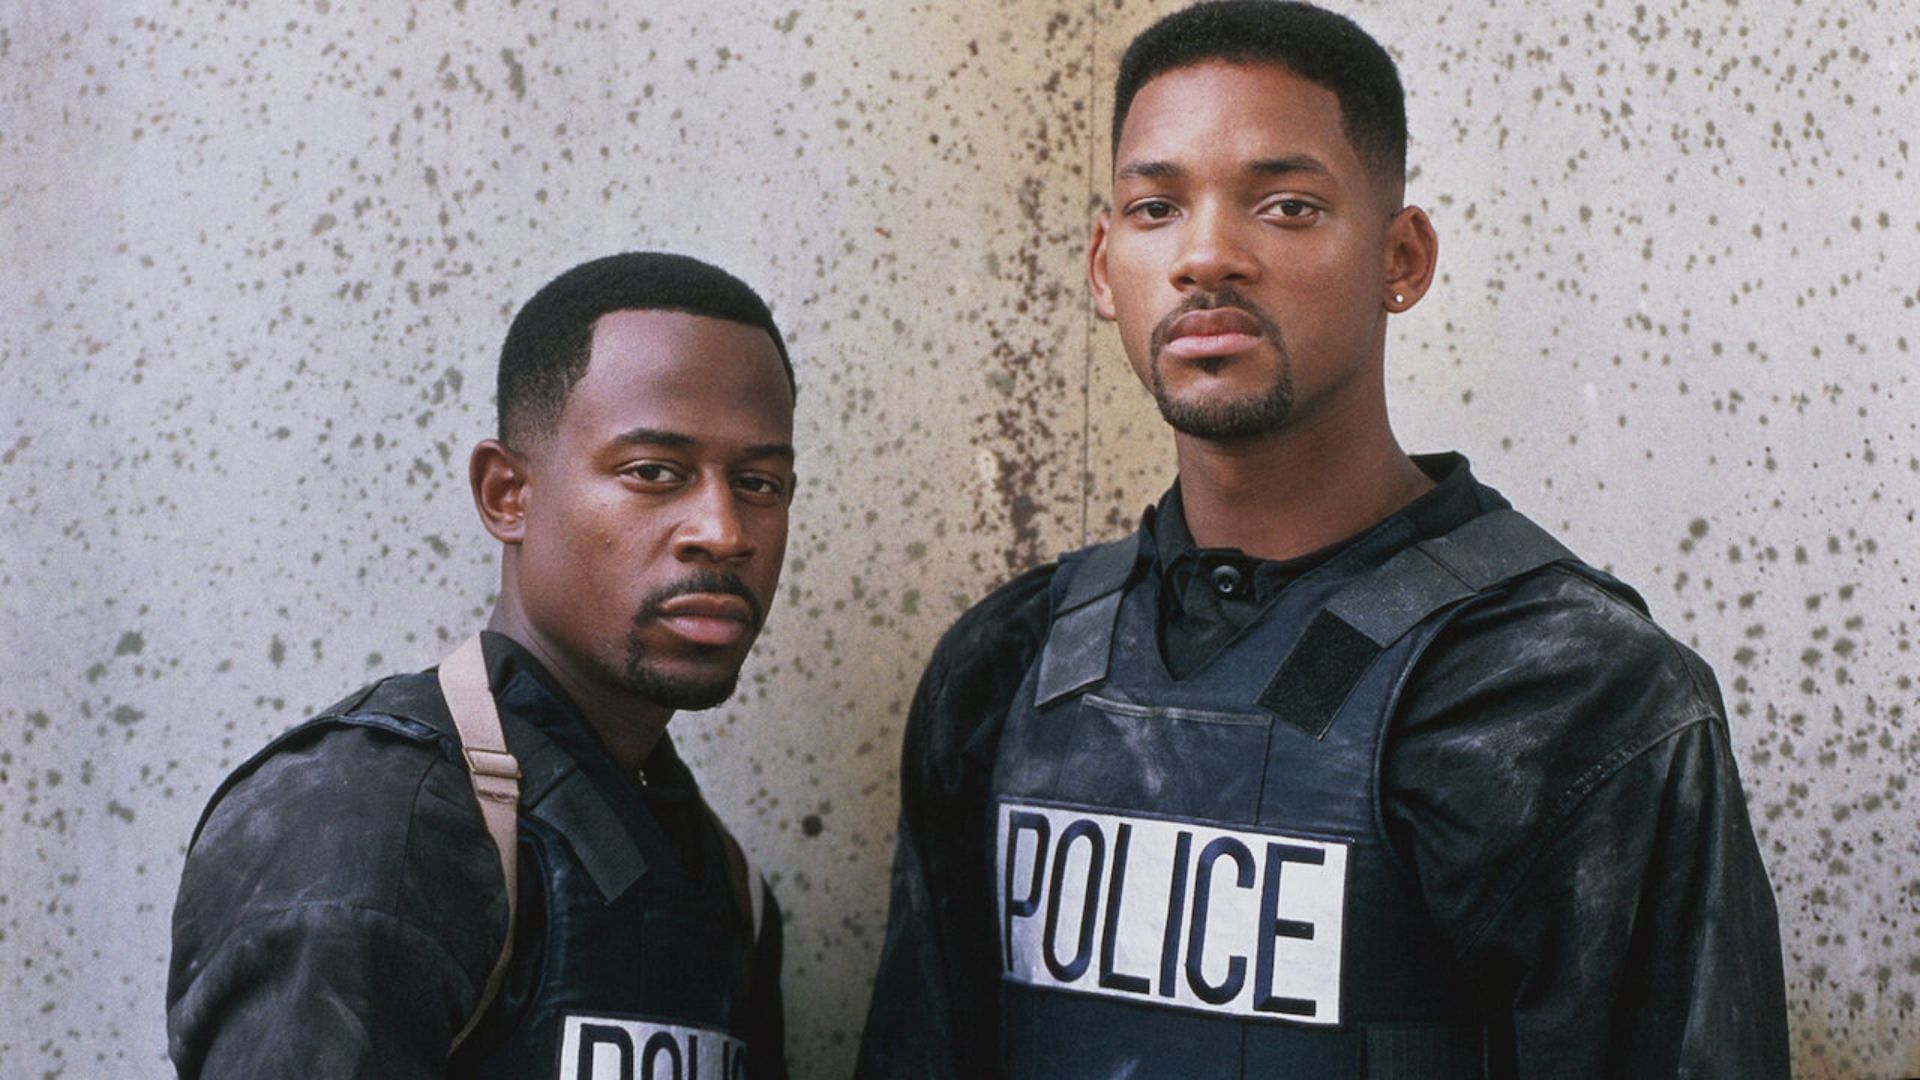 Will Smith and Martin Lawrence as Mike and Marcus in Bad Boys for Life (Image via Netflix)